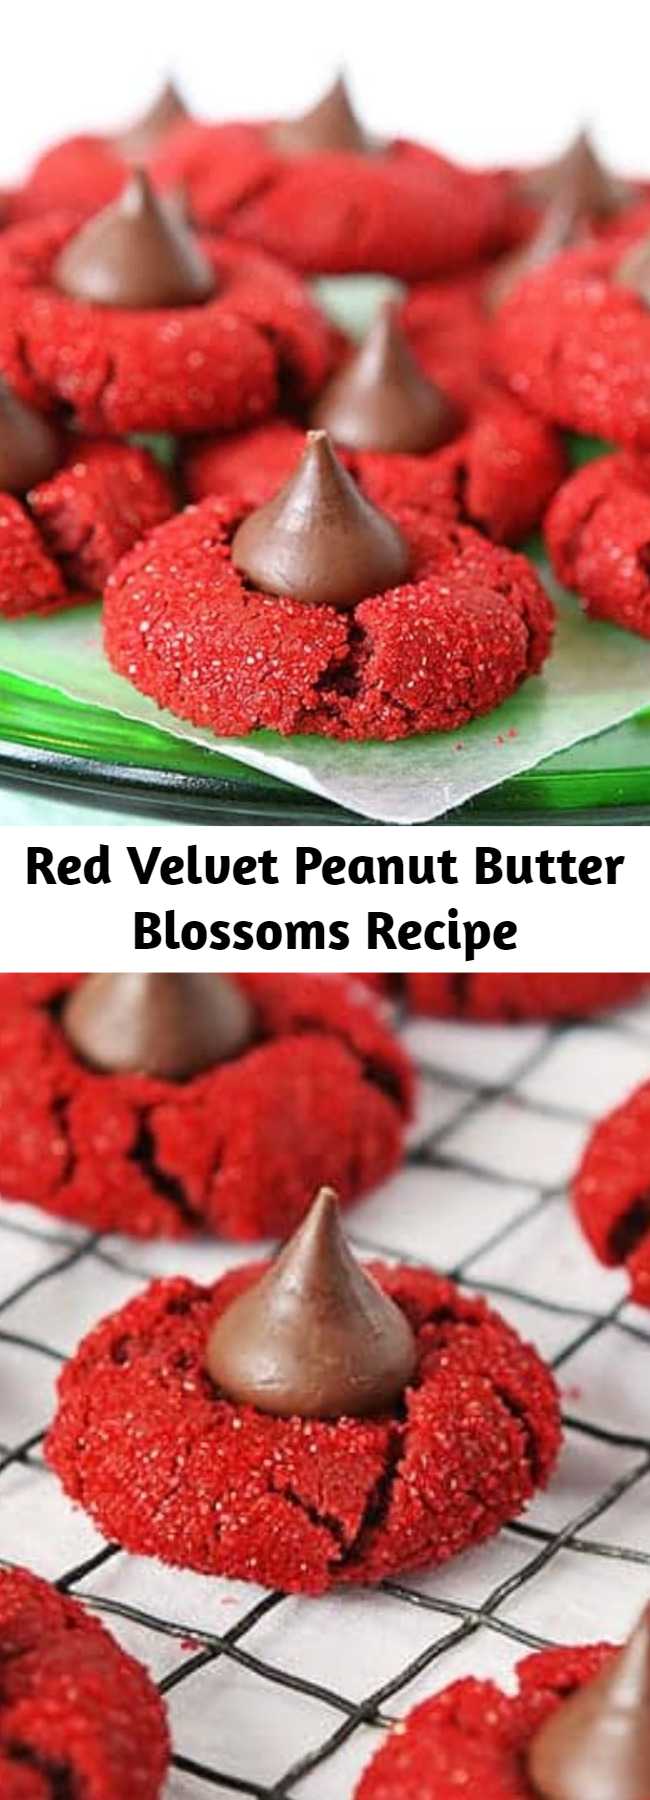 Red Velvet Peanut Butter Blossoms Recipe - This is a soft cookie that is crisp on the outside and chewy on the inside. These delicious cookies are so fun to share! #redvelvetpeanutbutterblossoms #redvelvetkisscookies #kisscookies #cookies #cookierecipes #baking #christmascookies #christmascookieexchange #cookieexchange